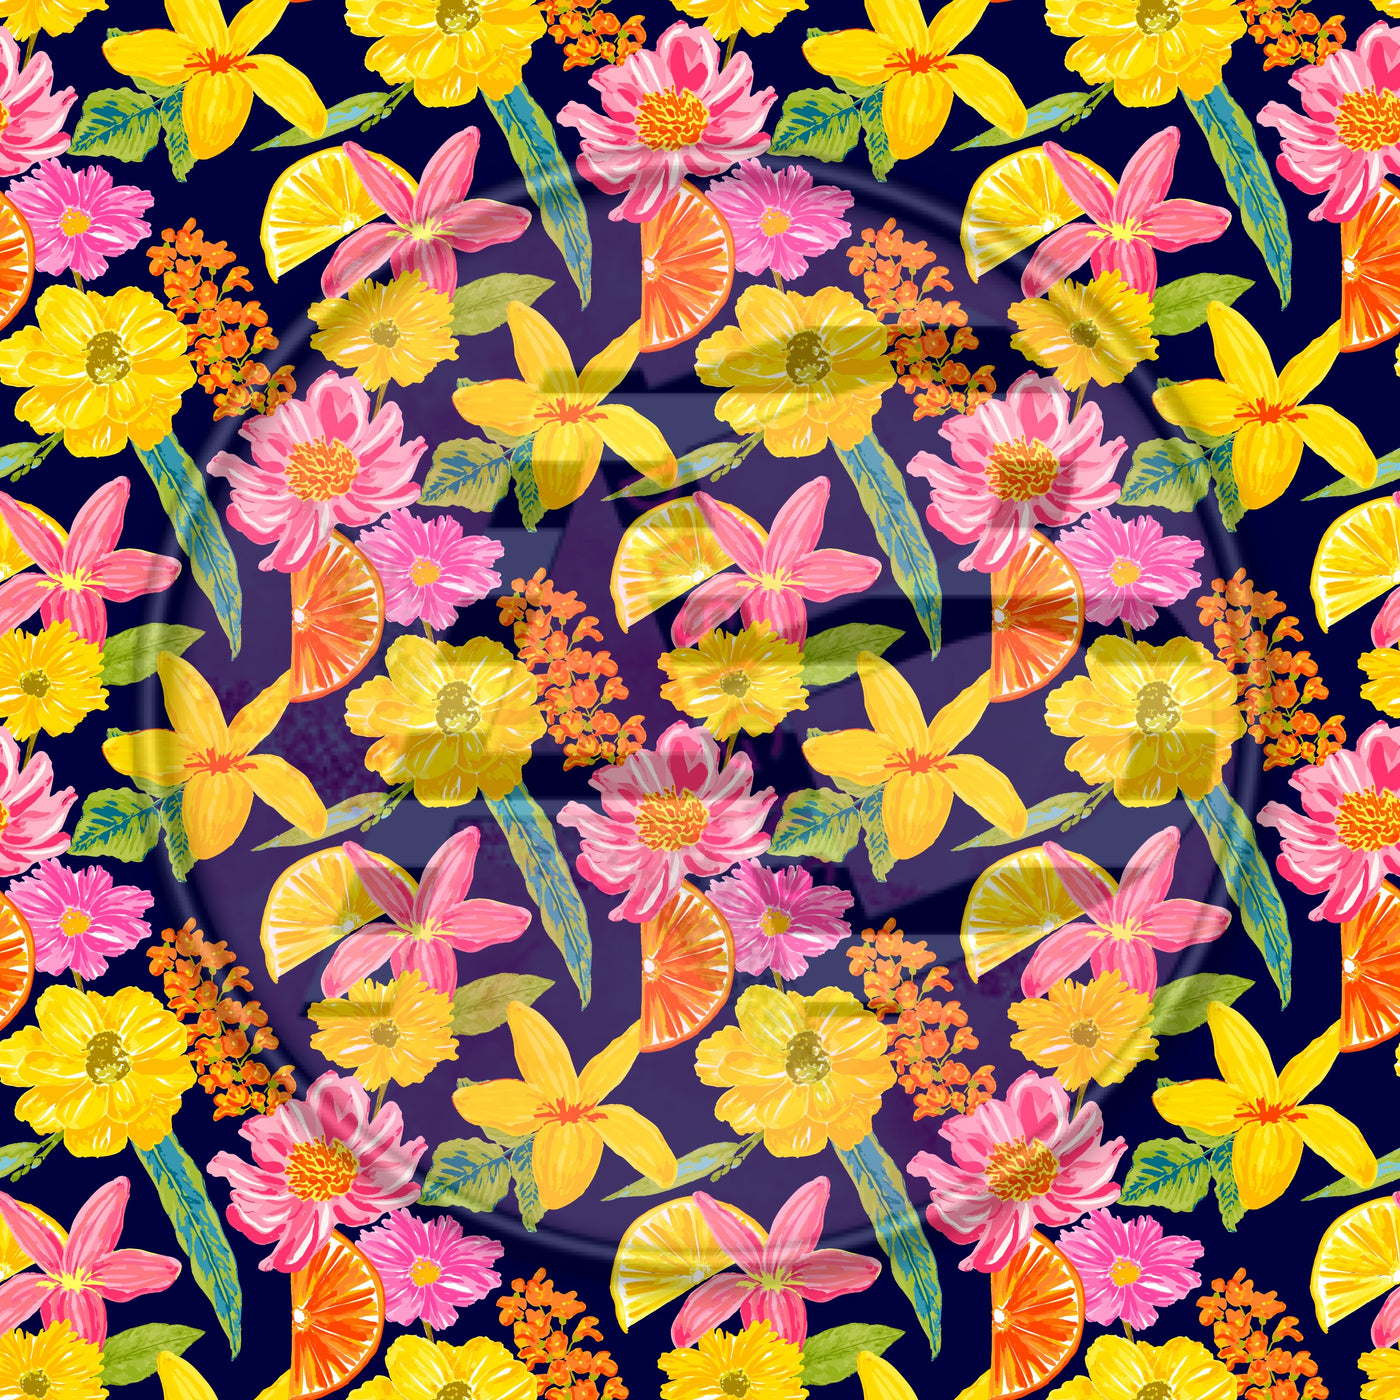 Adhesive Patterned Vinyl - Tropical 217